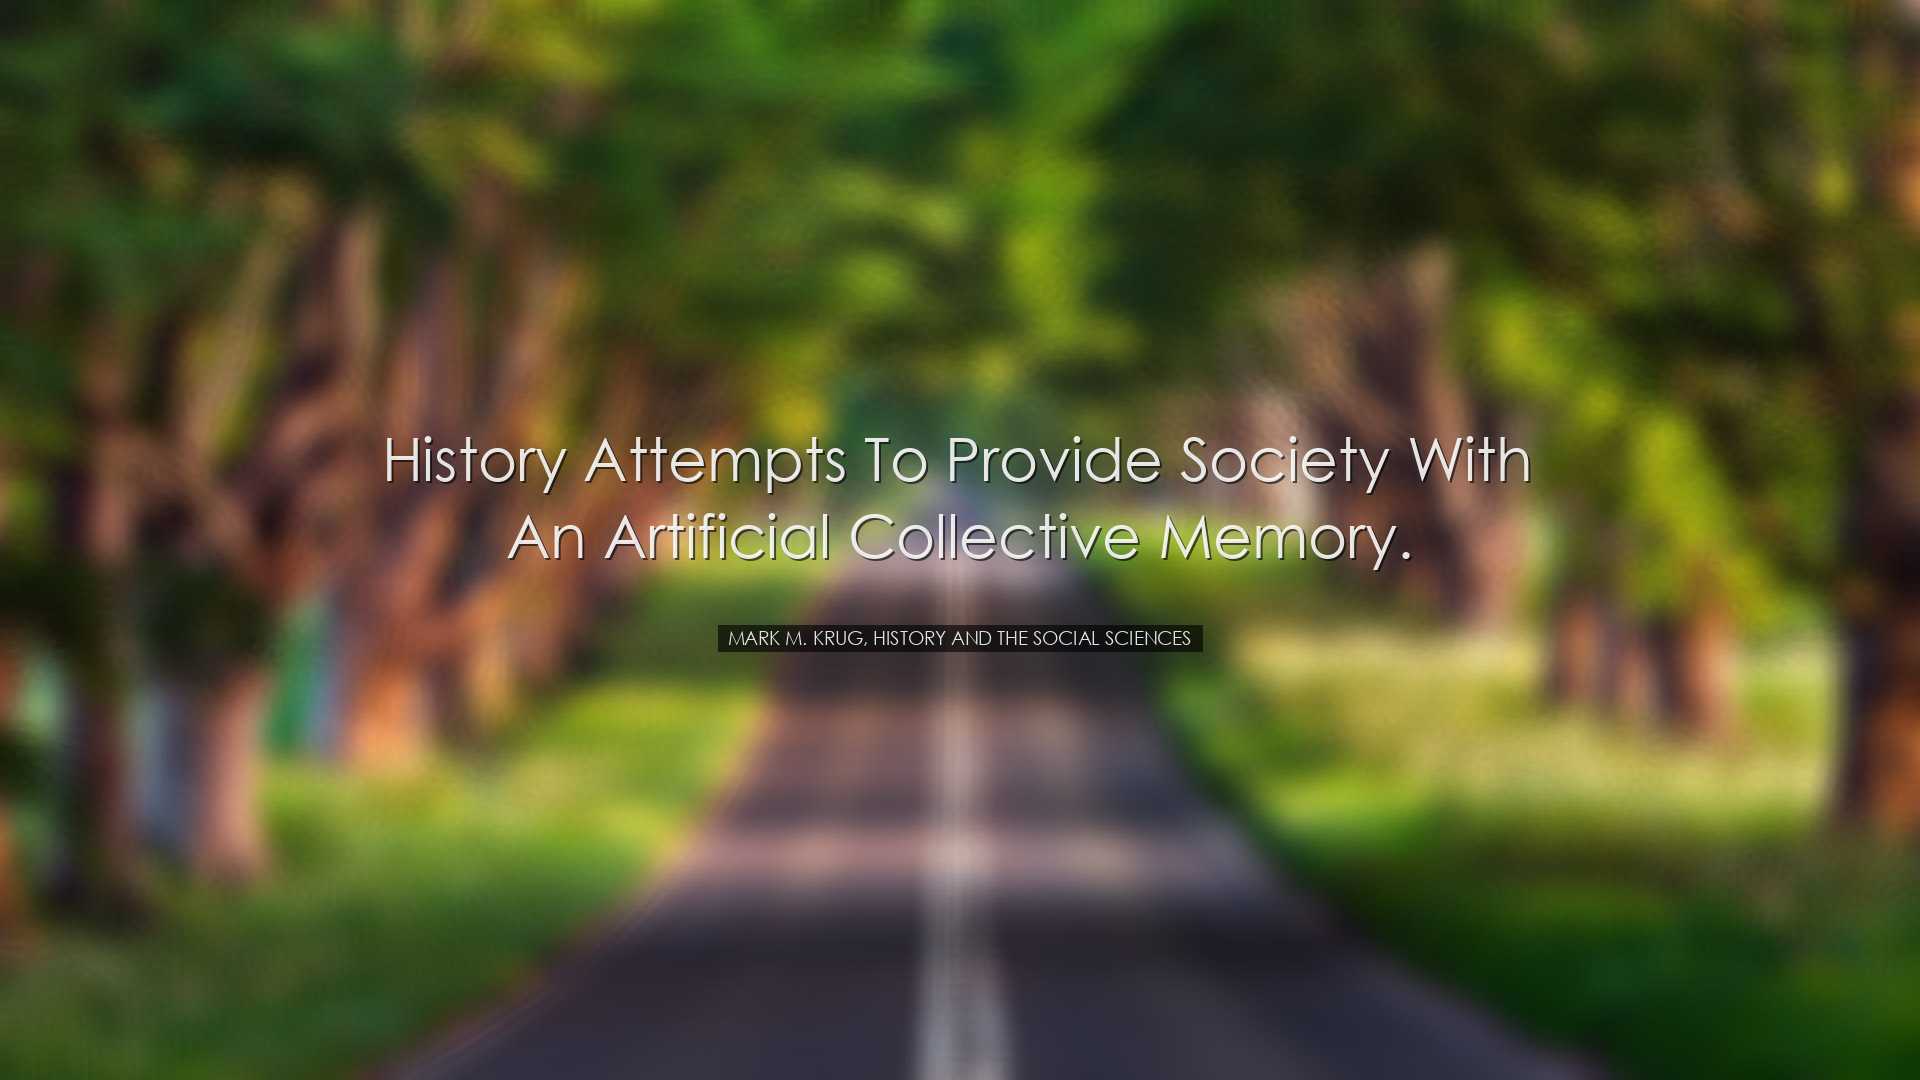 History attempts to provide society with an artificial collective